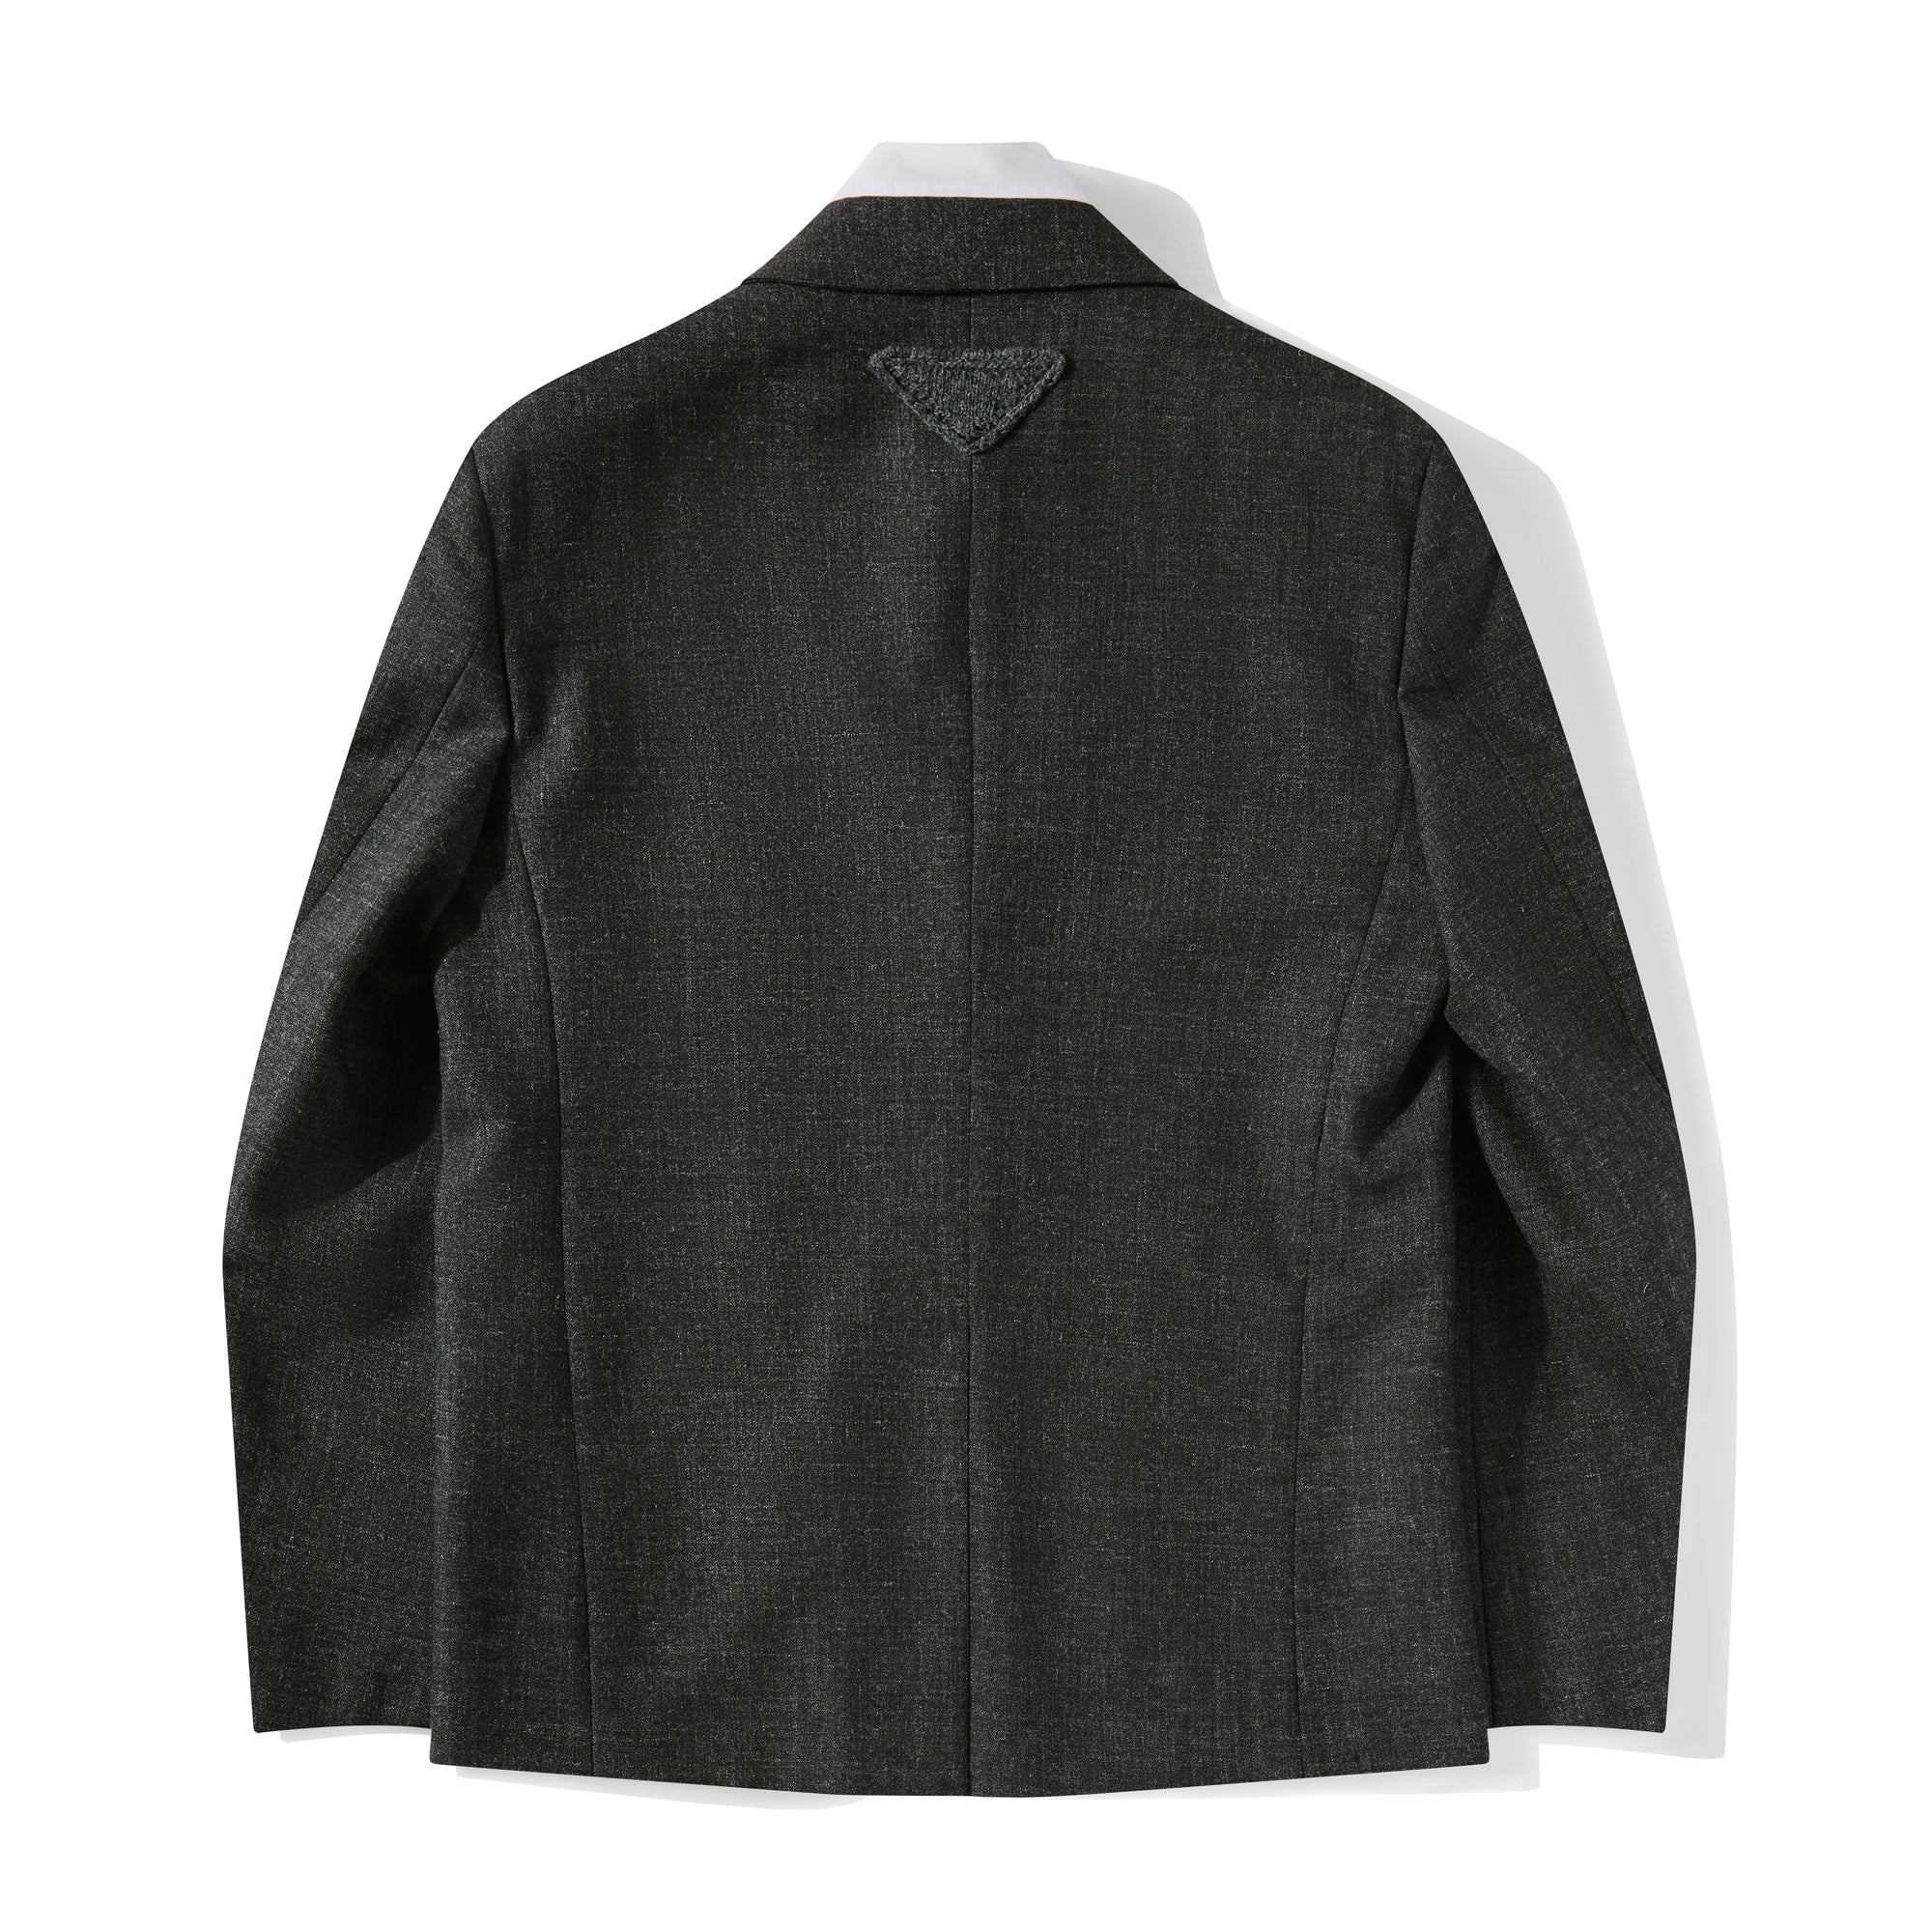 Prada - Men’s Single-breasted Wool Jacket With Collar - (Grey) view 2